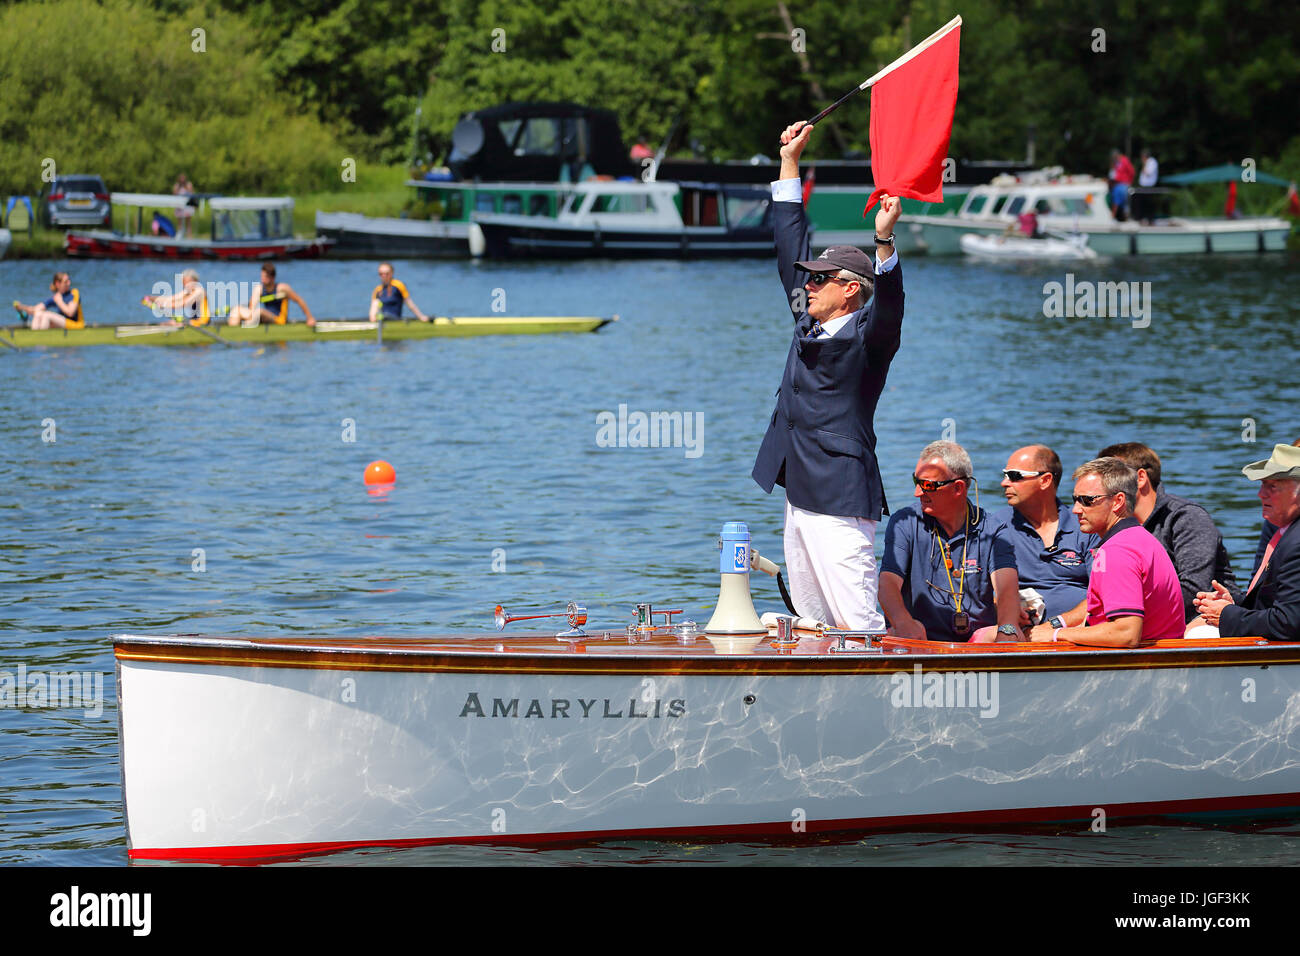 The umpire waves the red flag to start the race the final day of Henley Royal Regatta 2017 Stock Photo